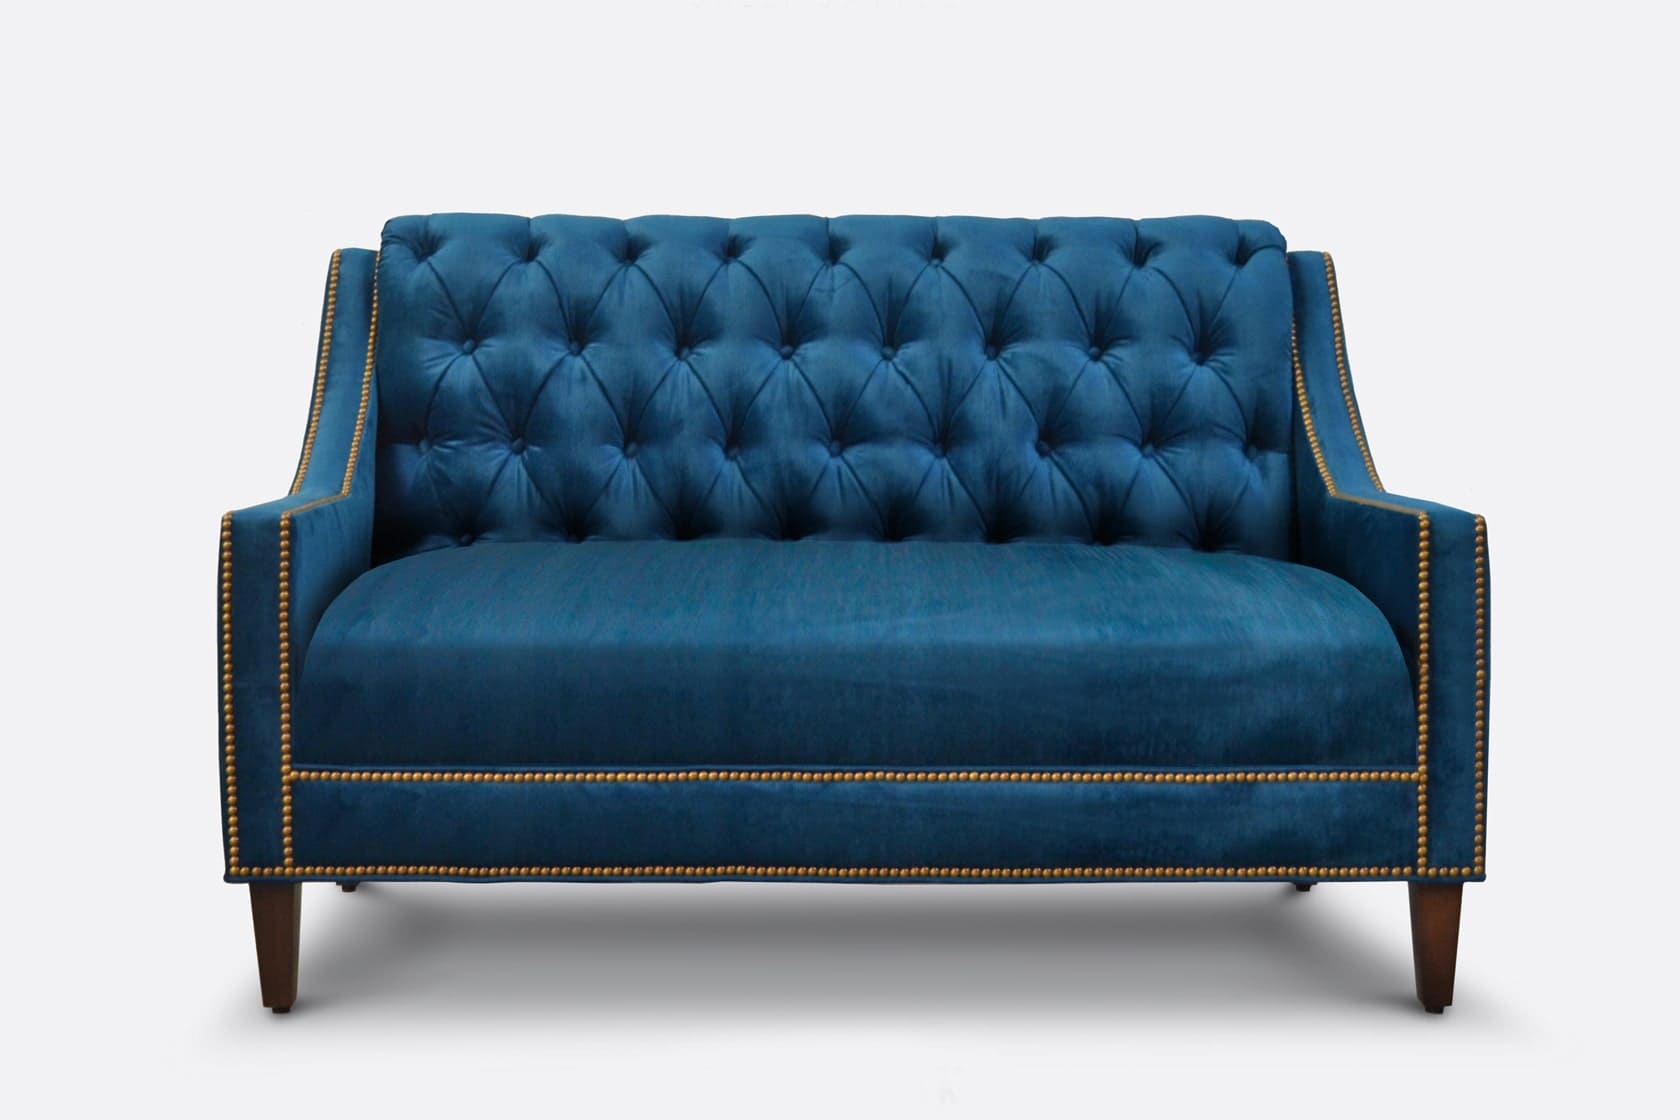 Colwell Slope arm settee shown in Thompson Caspien blue fabric